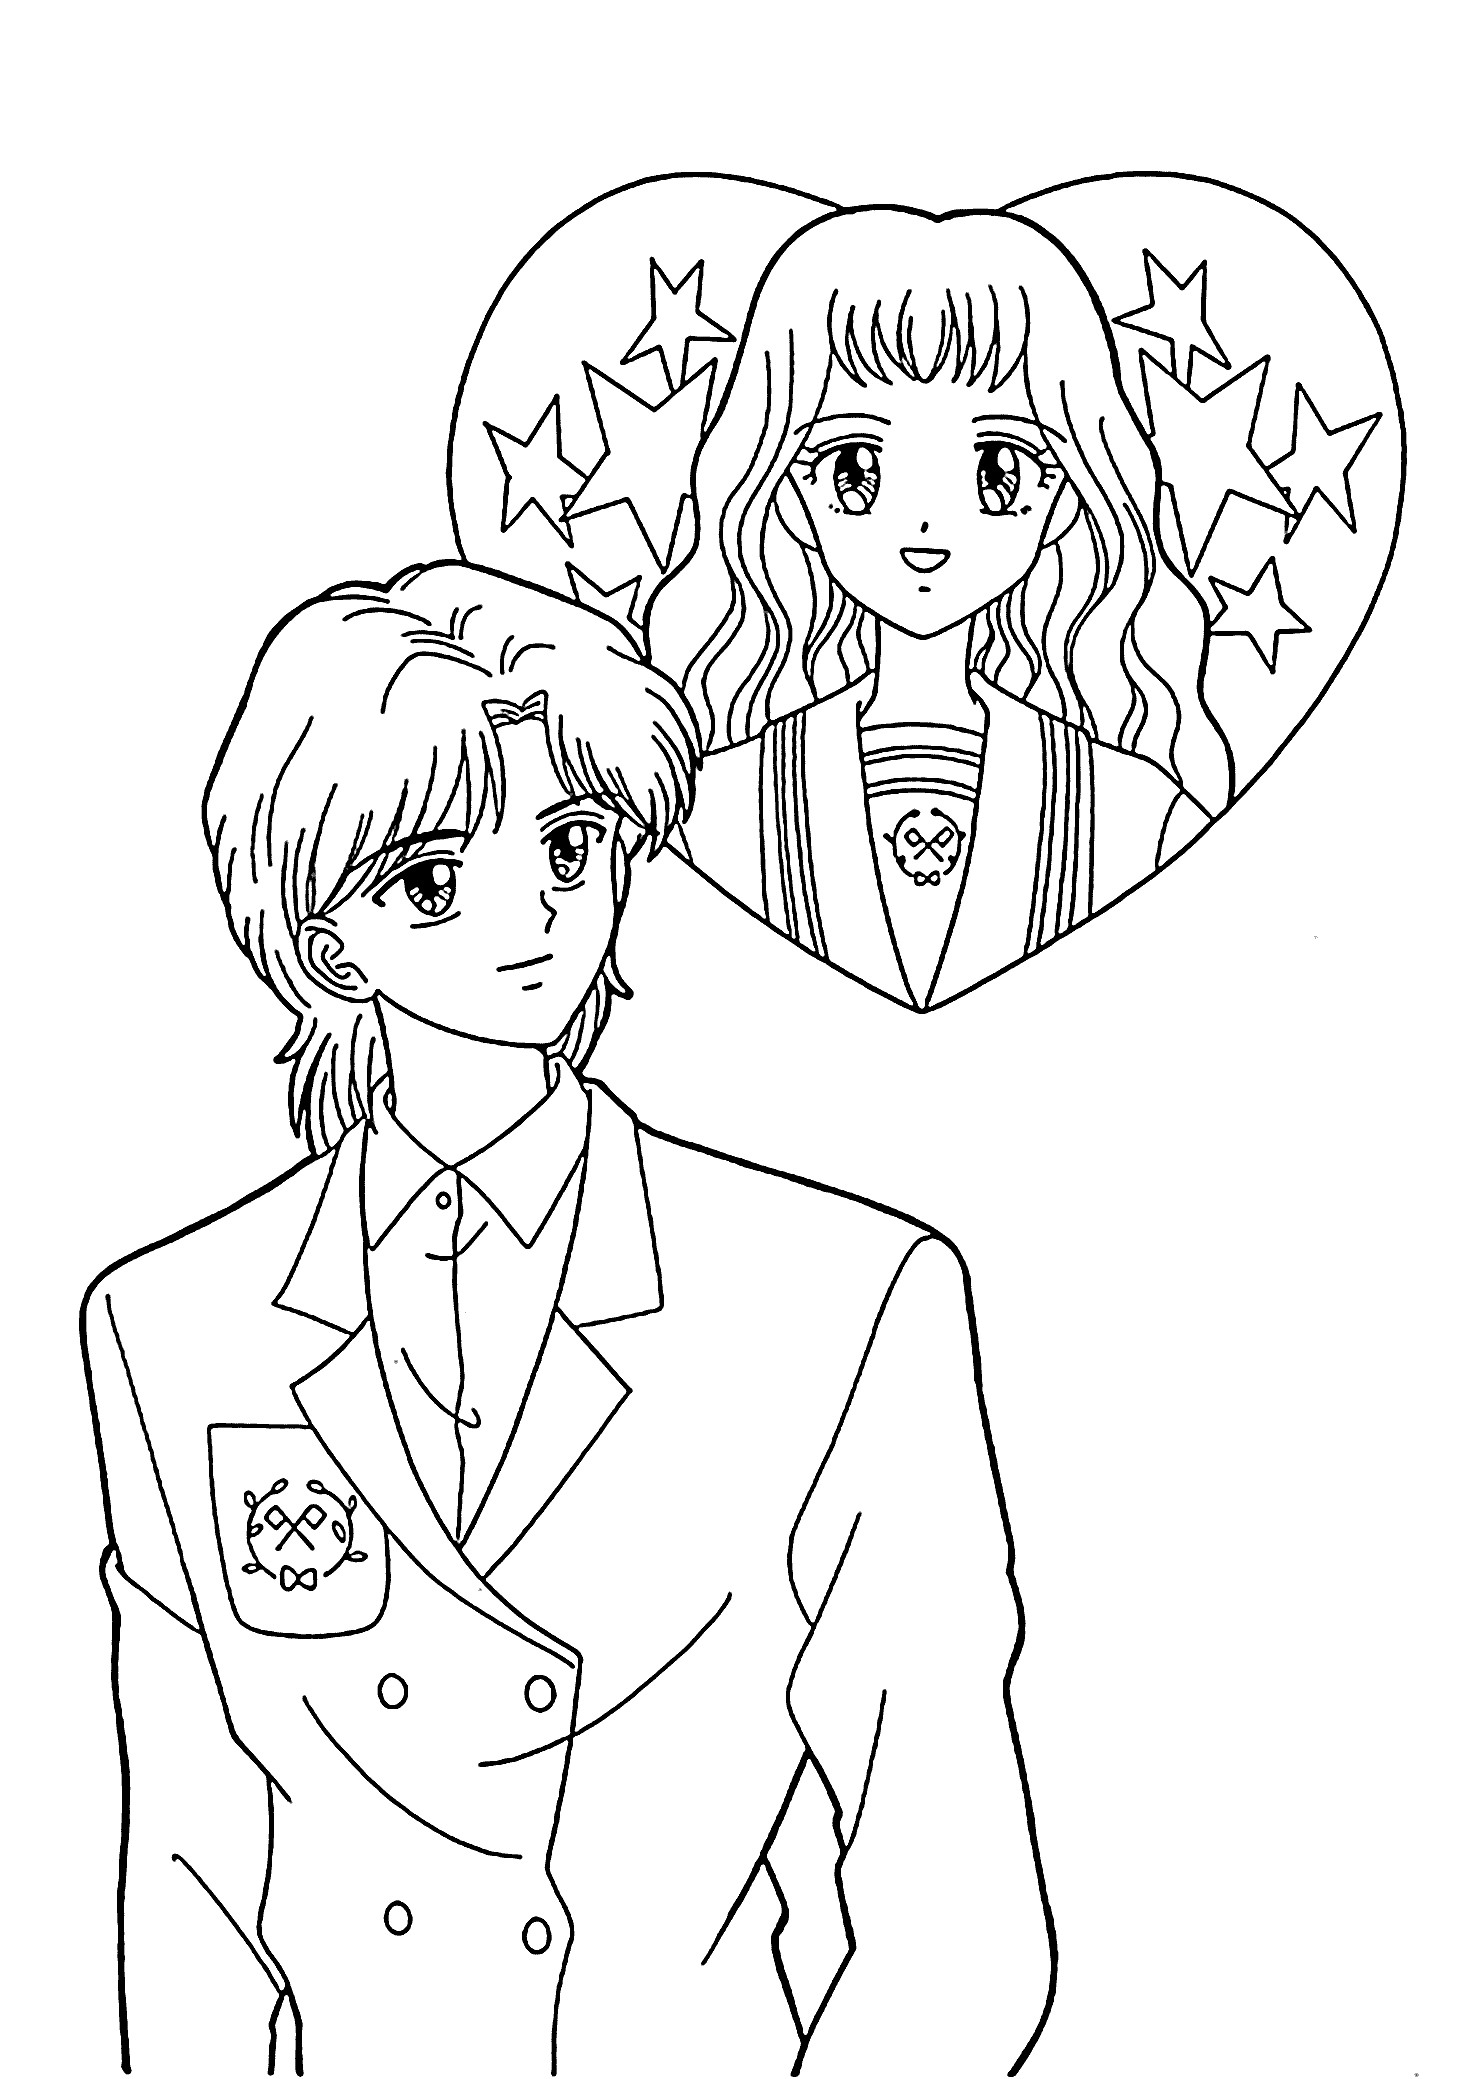 Anime Coloring Pages For Teens
 manga coloring pages for teens boys manga coloring pages